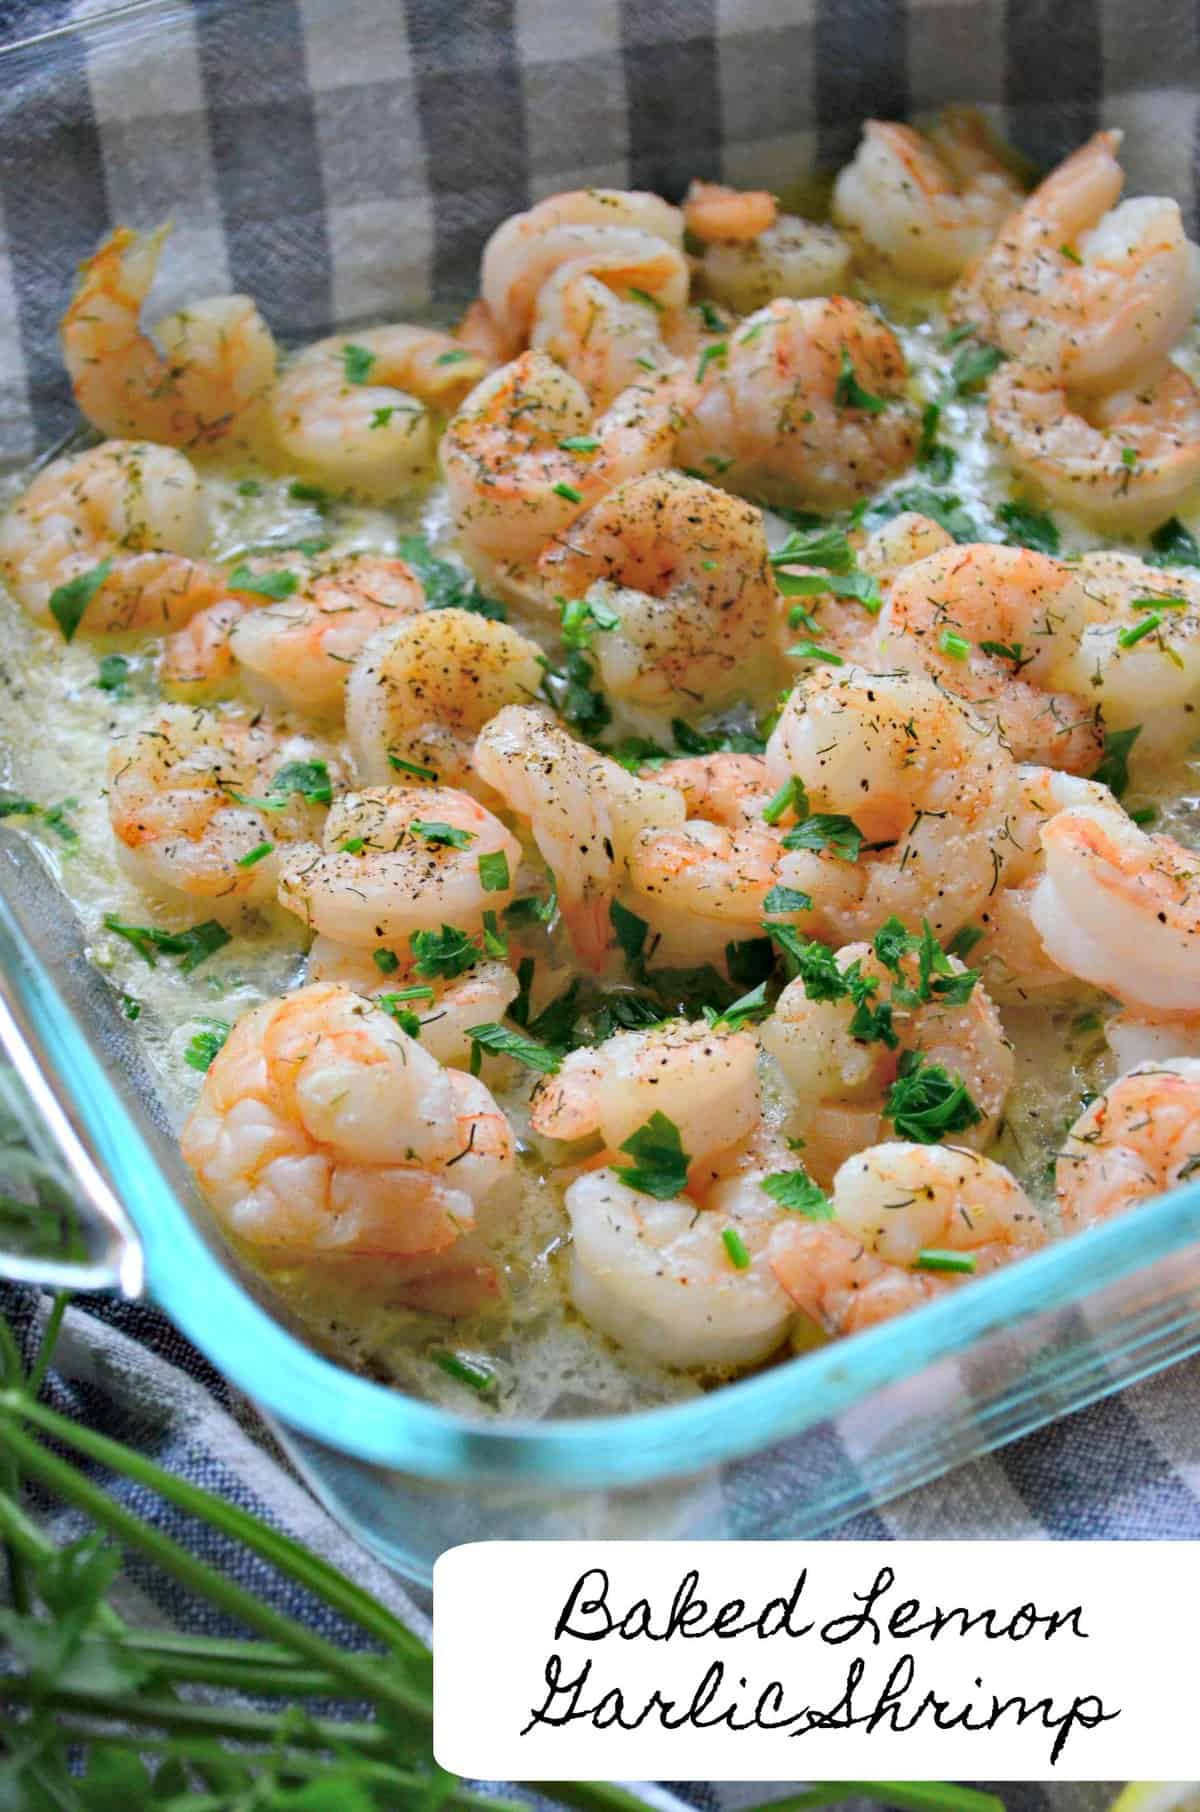 baked lemon garlic shrimp in melted butter in glass dish topped with herbs and spices with title text.